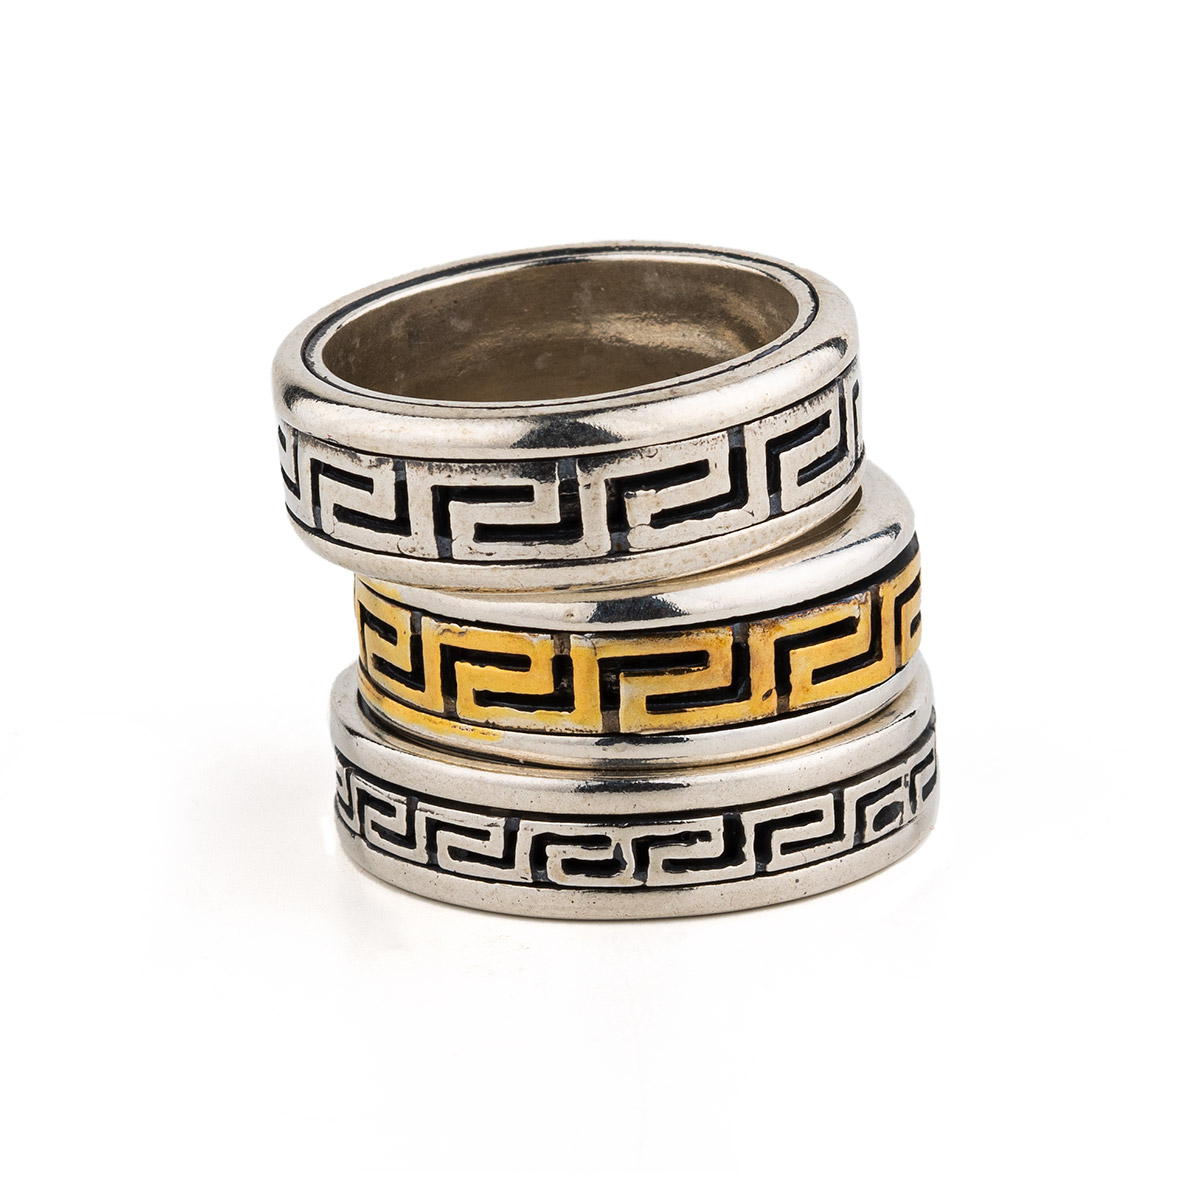 Greek key Ring – 925 Sterling Silver and Gold Plated - GREEK ROOTS